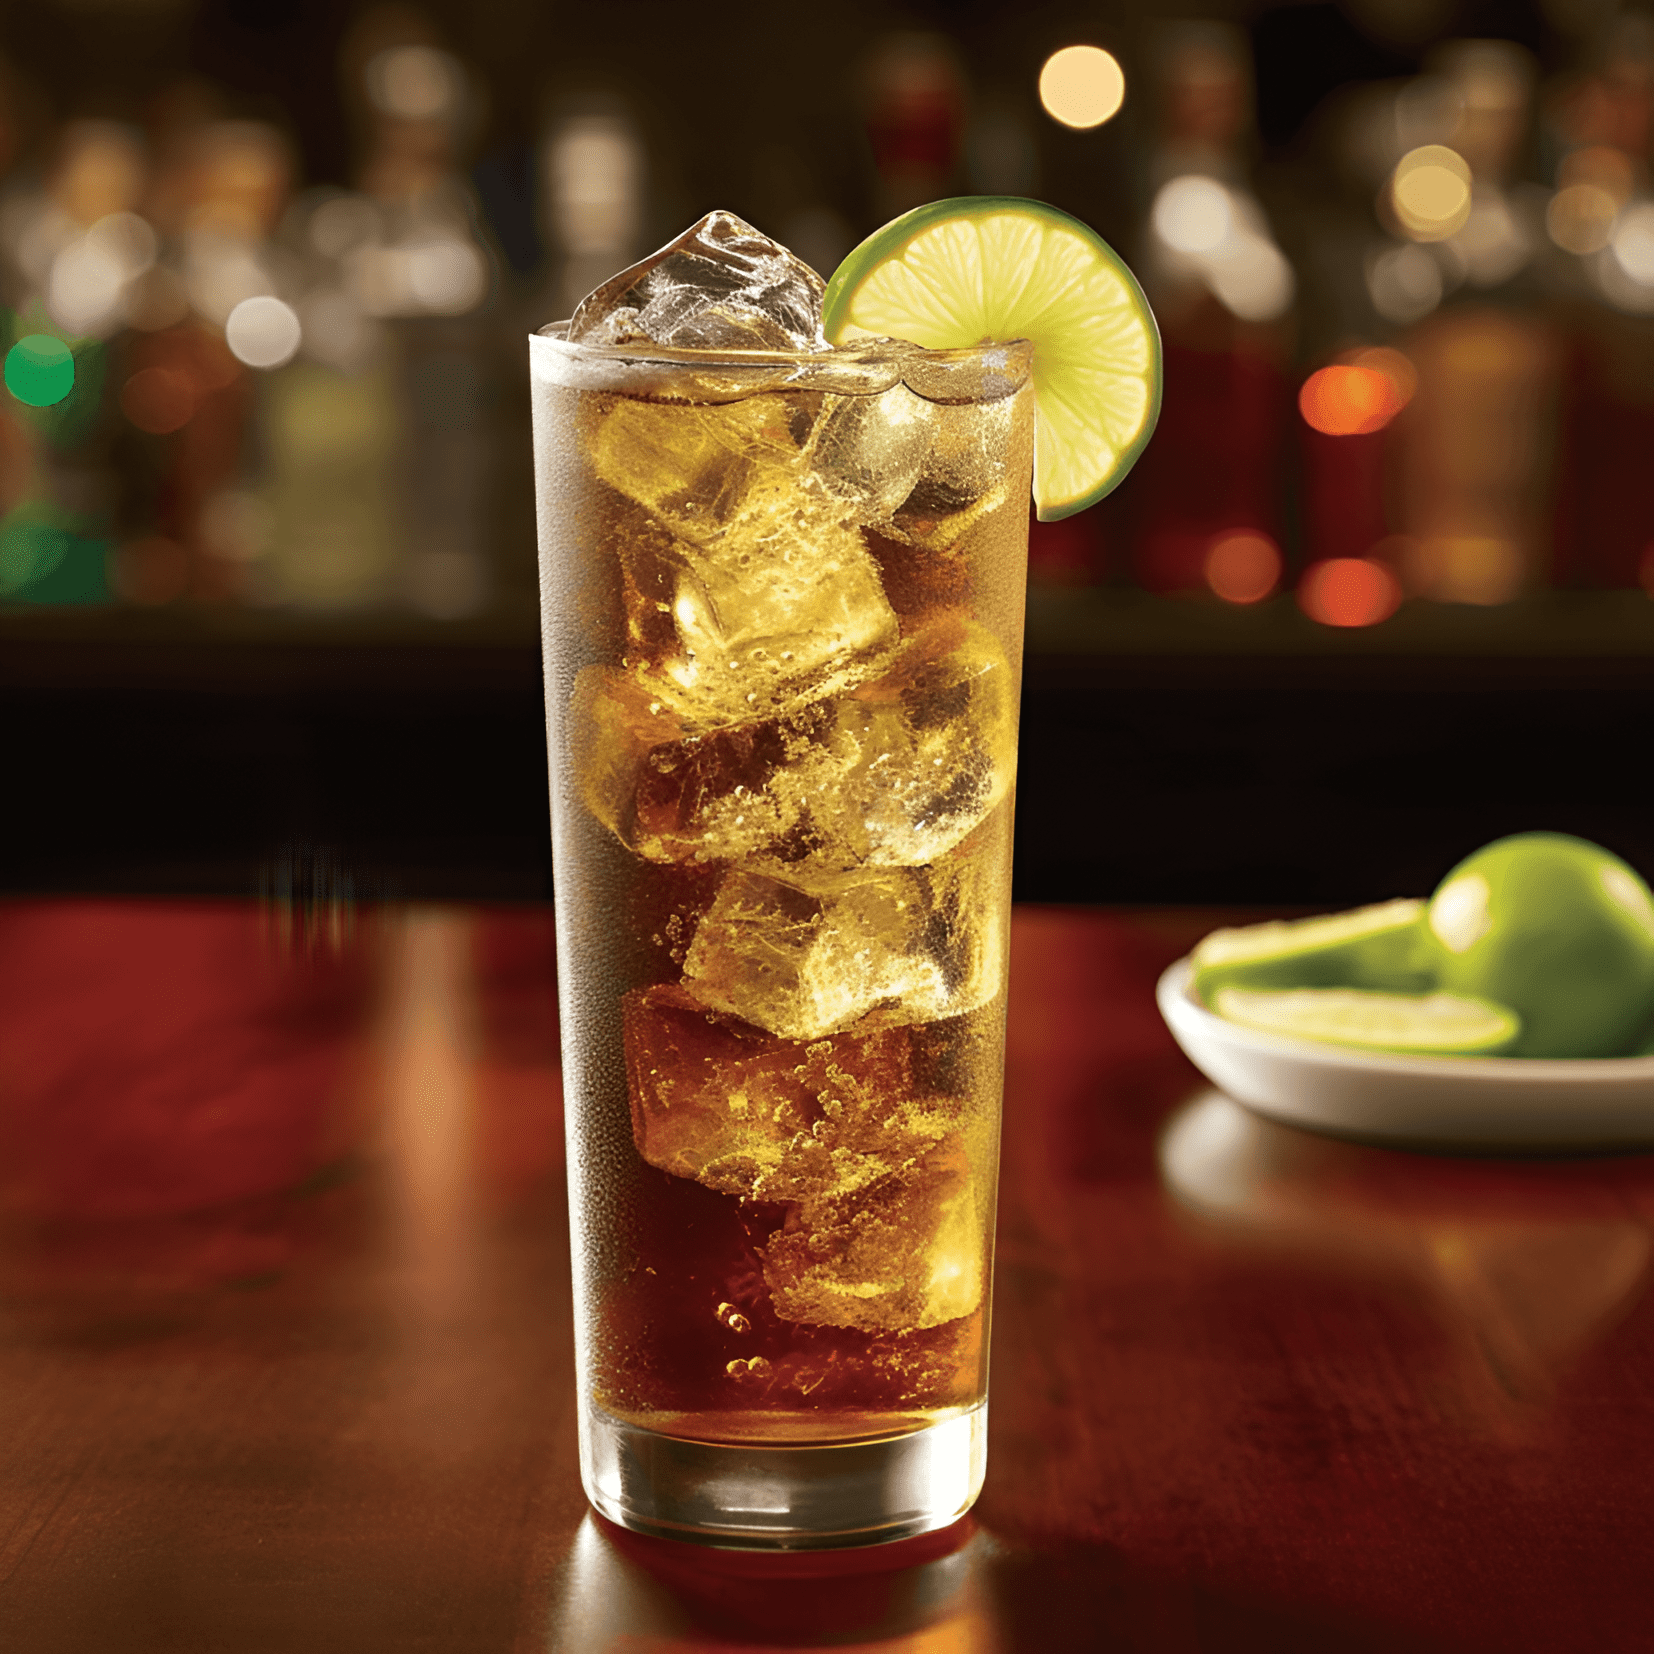 Cuban Highball Cocktail Recipe - The Cuban Highball is a refreshing, sweet, and slightly tangy cocktail with a hint of warmth from the rum. The combination of cola, lime, and rum creates a balanced and easy-to-drink beverage.